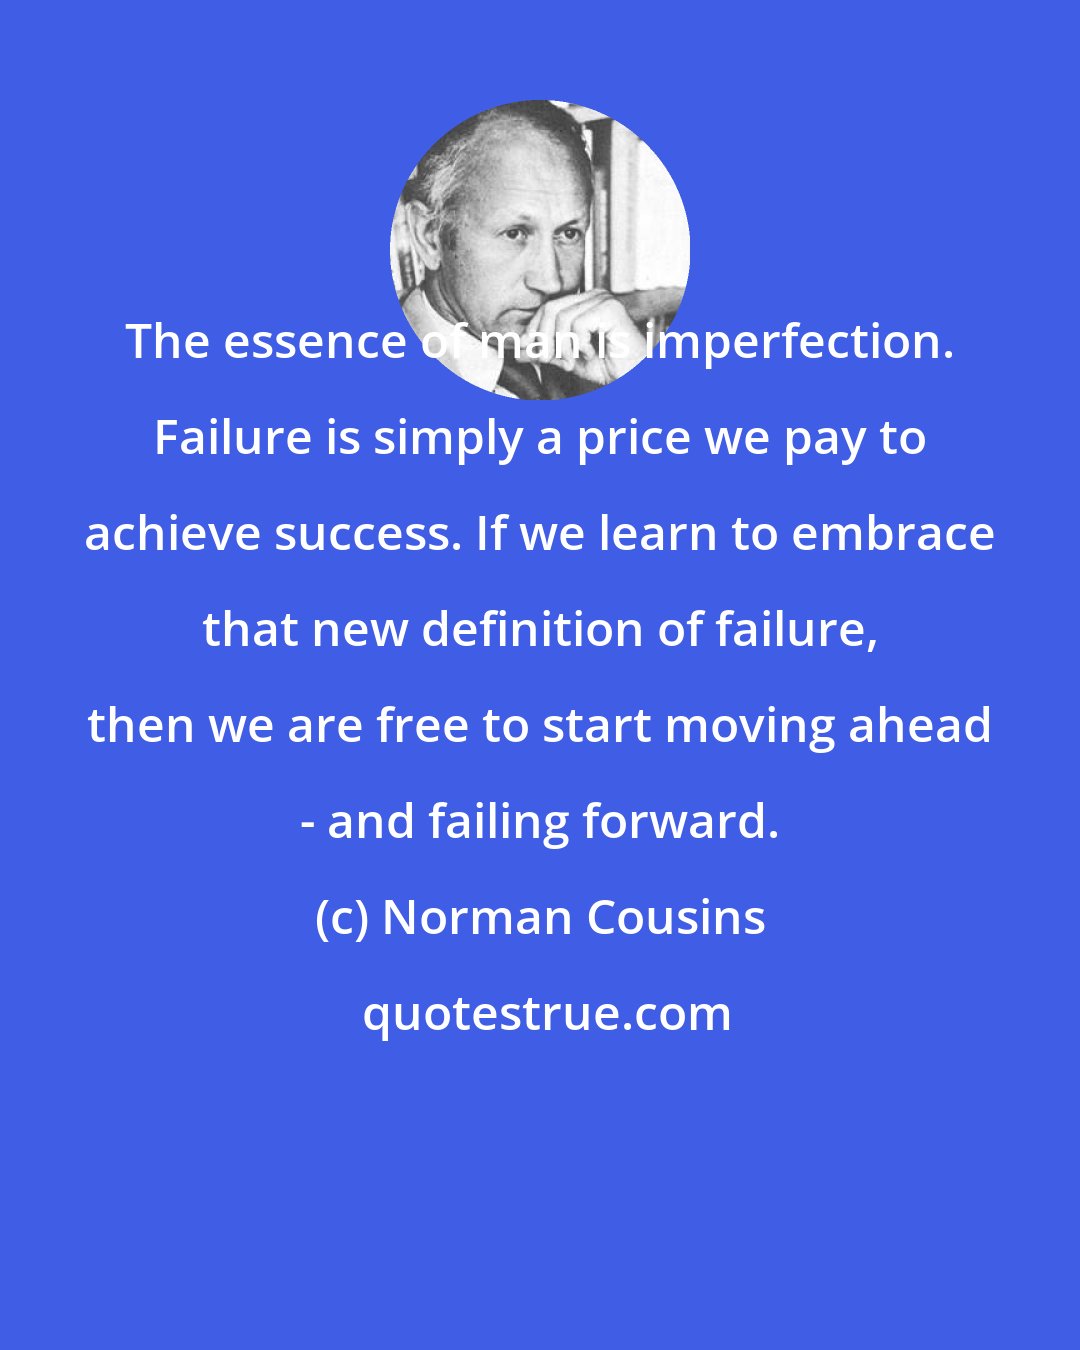 Norman Cousins: The essence of man is imperfection. Failure is simply a price we pay to achieve success. If we learn to embrace that new definition of failure, then we are free to start moving ahead - and failing forward.